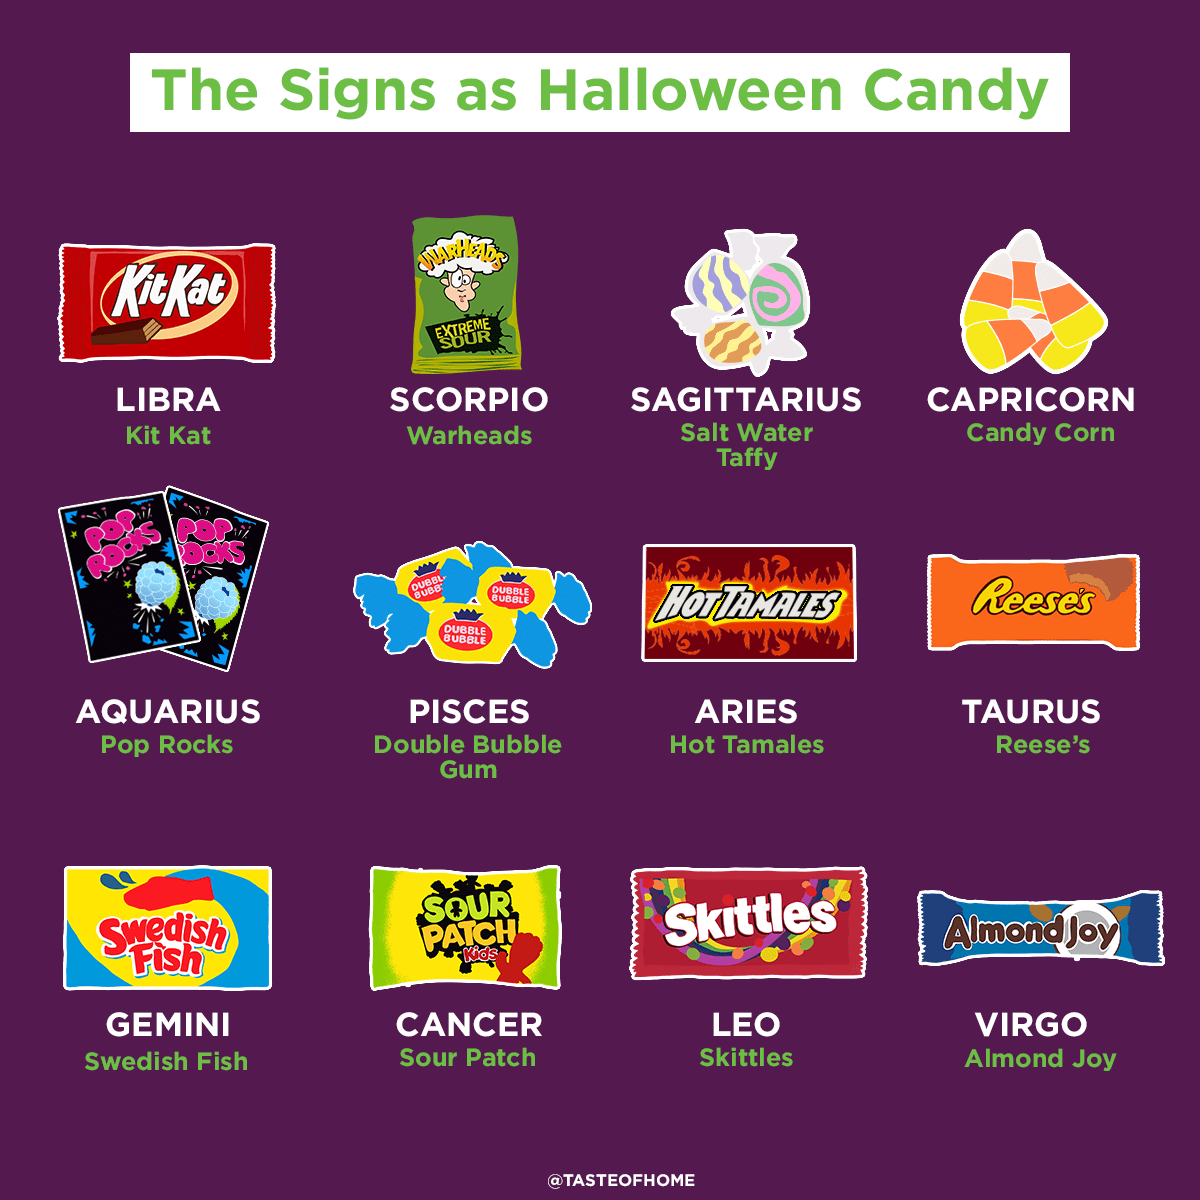 Your Favorite Halloween Candy Based on Your Zodiac Sign | Reader's Digest